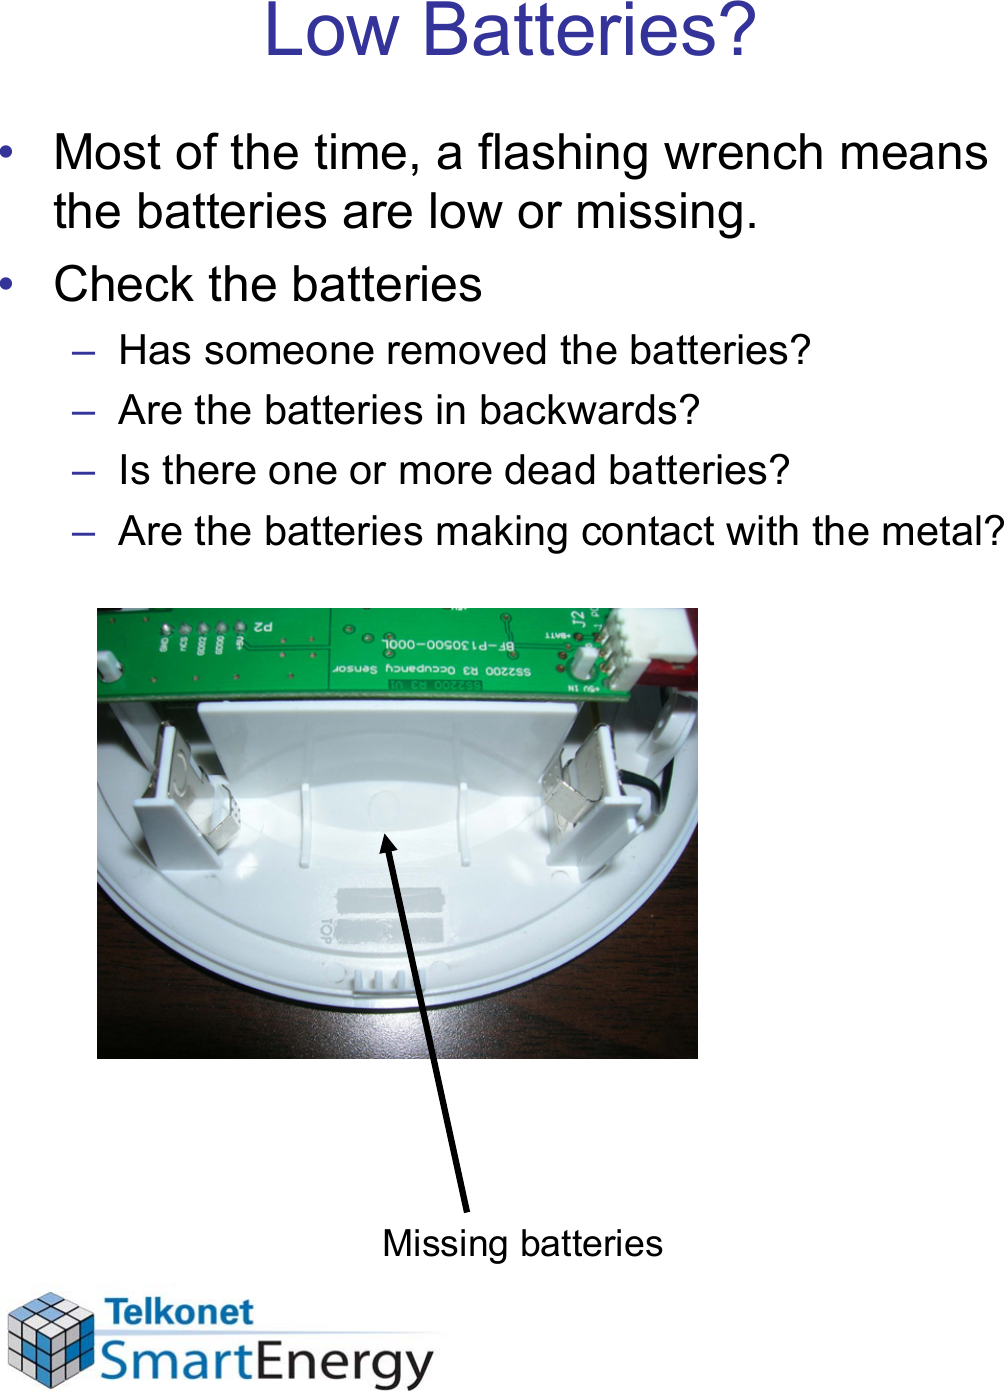 Low Batteries?• Most of the time, a flashing wrench means the batteries are low or missing.• Check the batteries– Has someone removed the batteries?– Are the batteries in backwards?– Is there one or more dead batteries?– Are the batteries making contact with the metal?Missing batteries